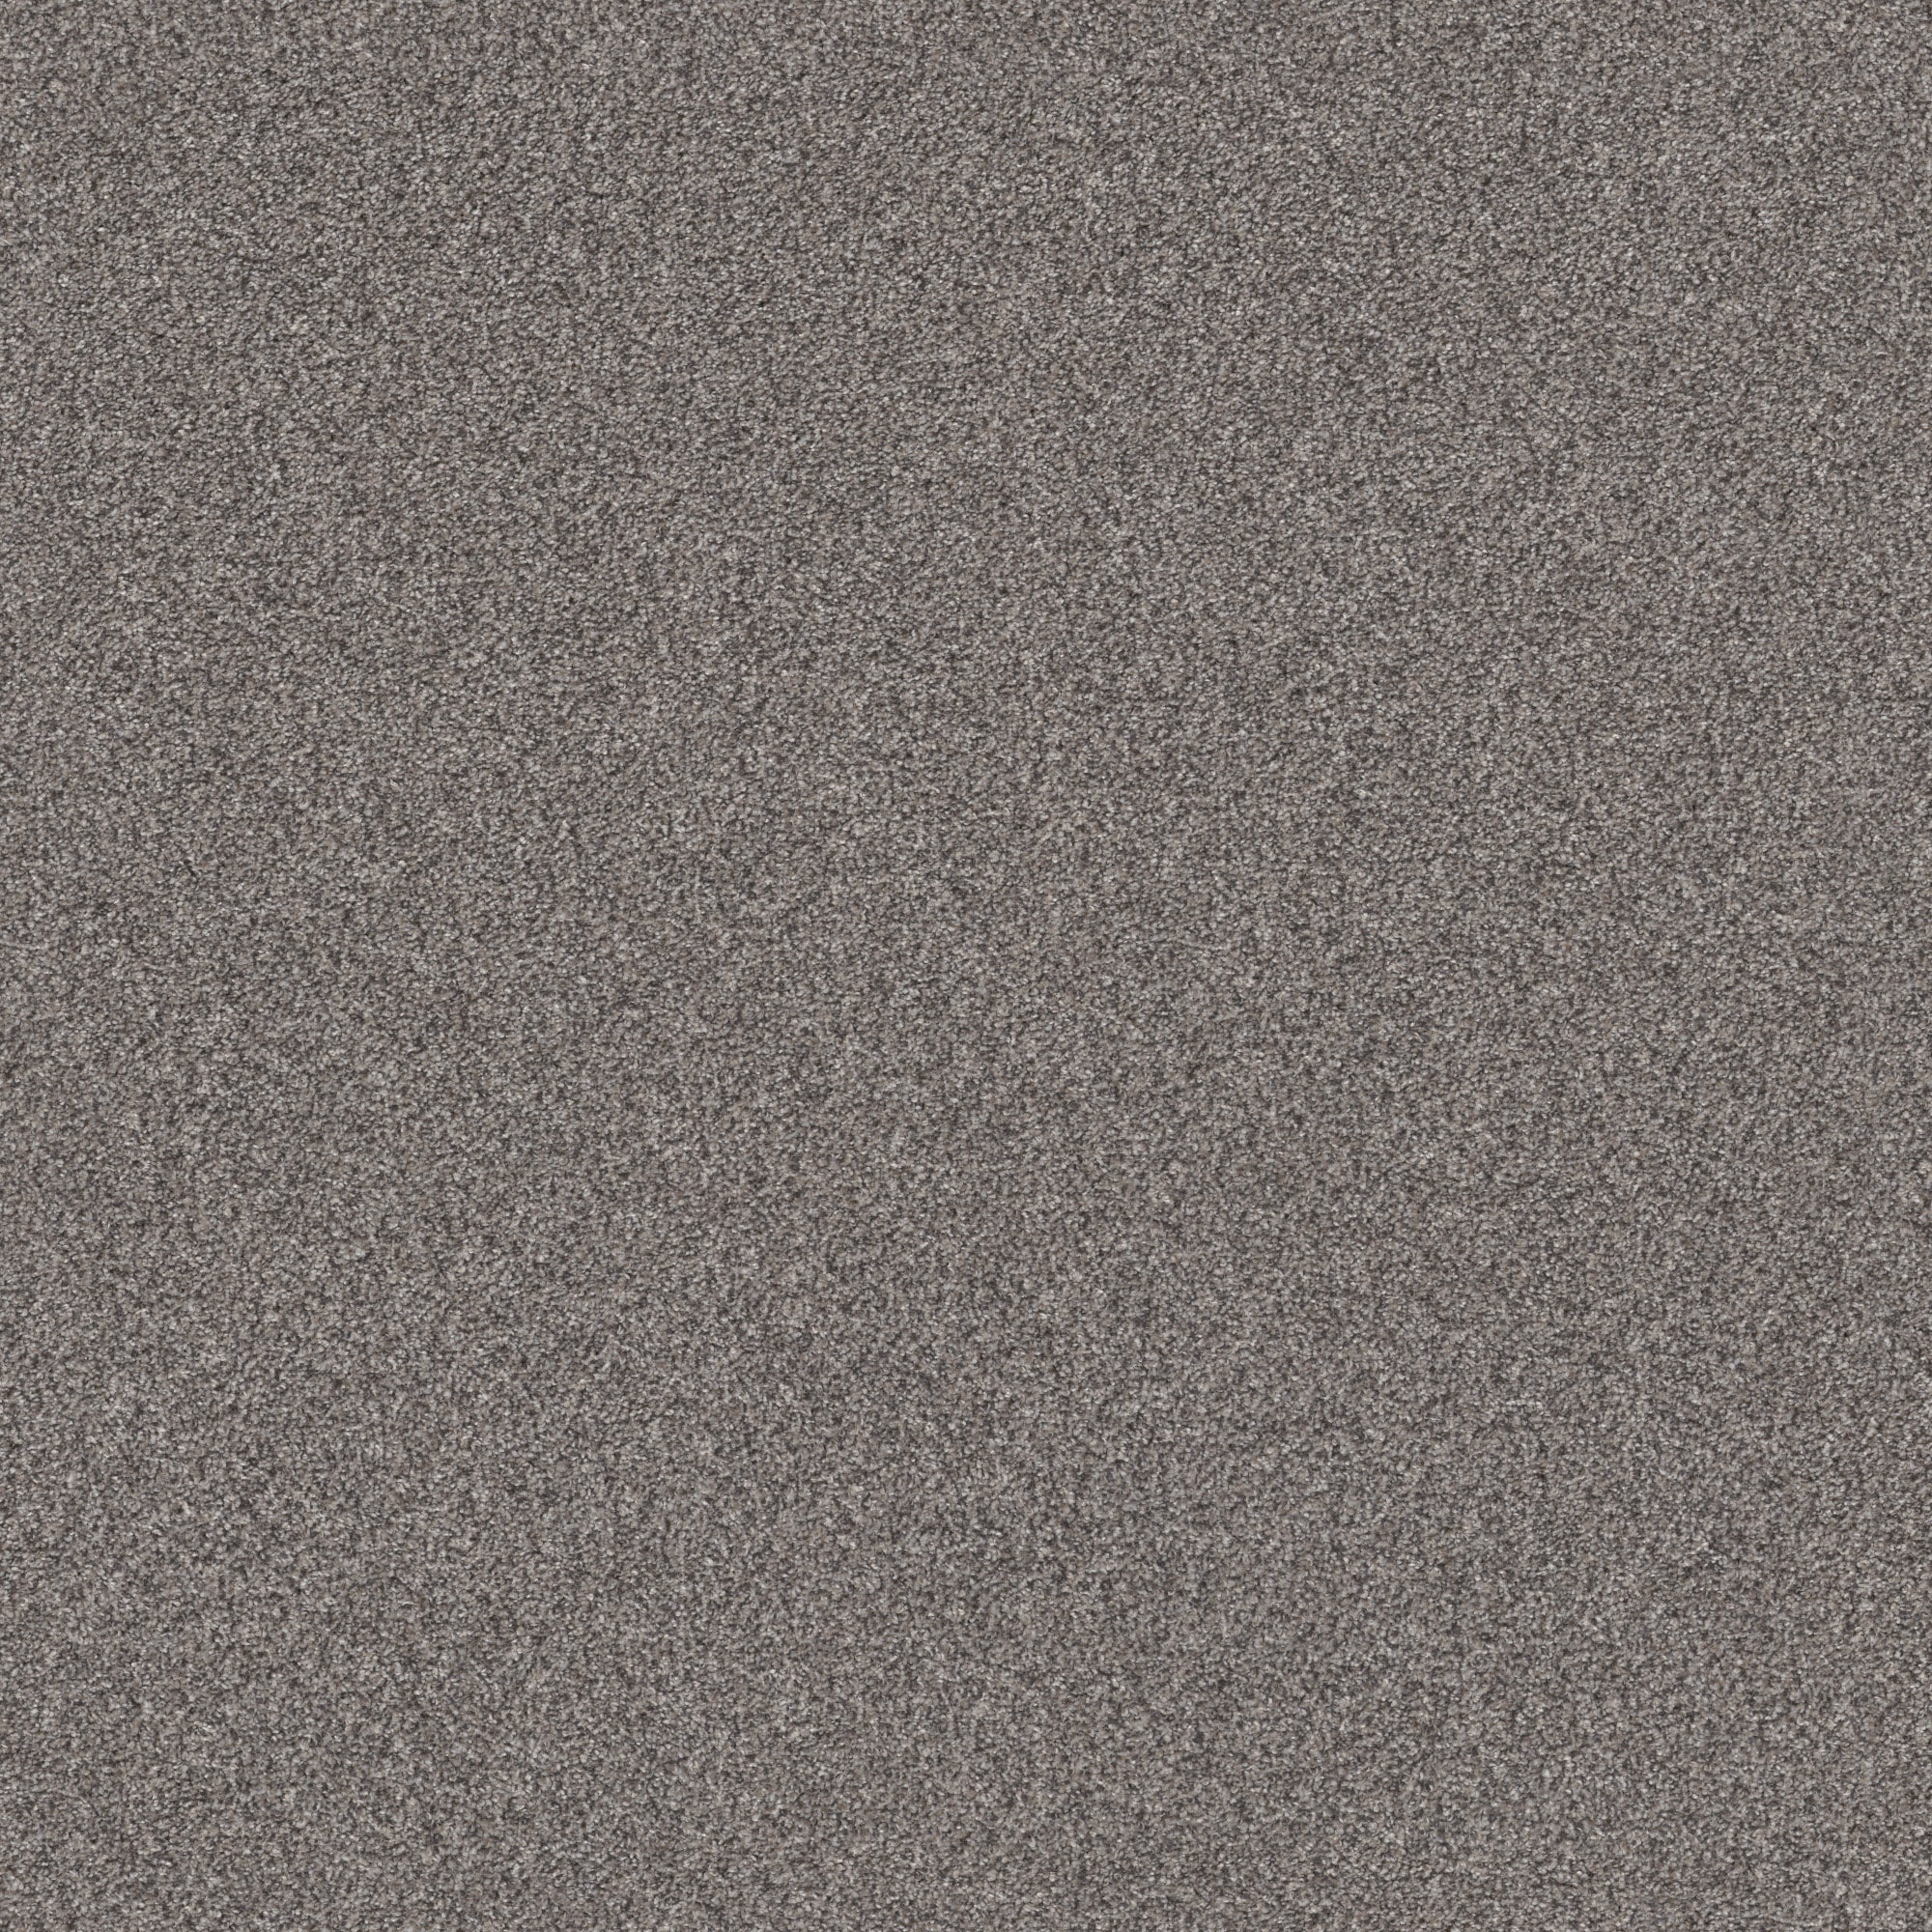 STAINMASTER Gray Carpet at Lowes.com